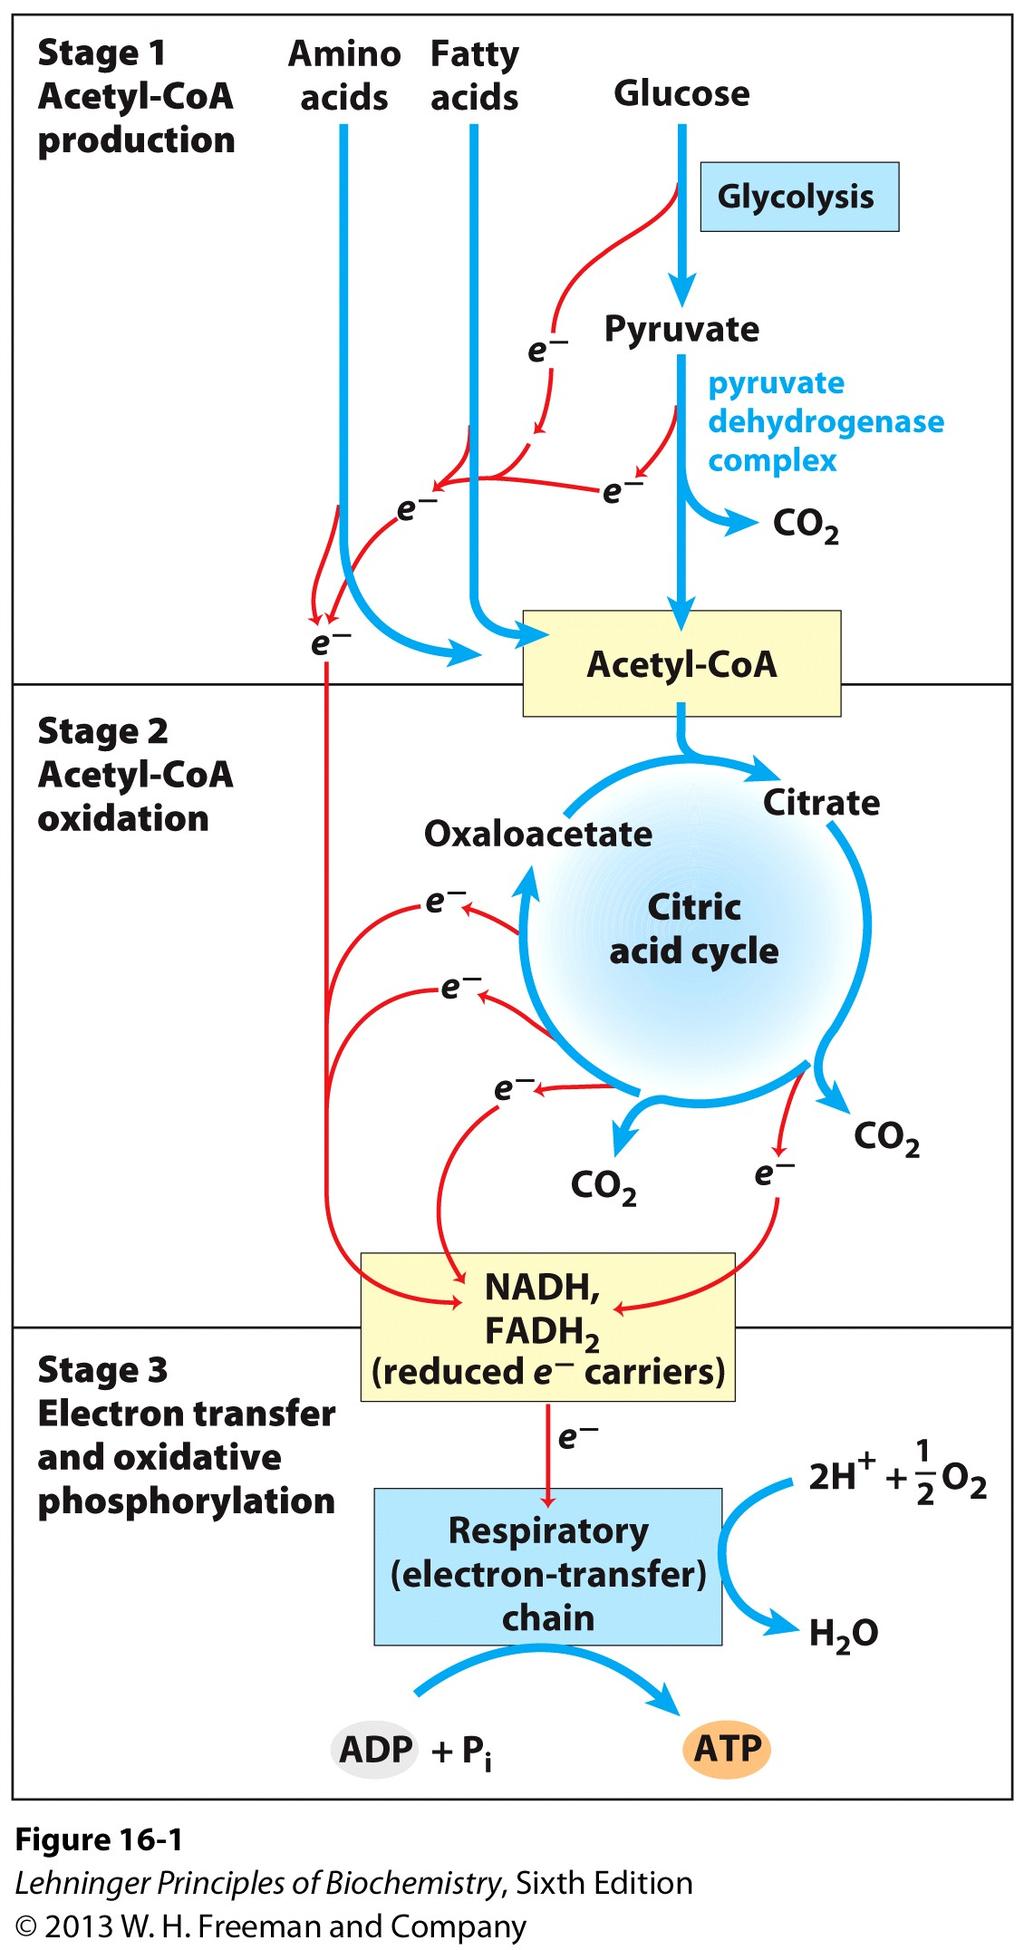 Catabolic pathways converge, anabolic pathways diverge Three stages of cellular respiration Glycolysis splits sugars and partially oxidizes the products, generating substrates for complete oxidation